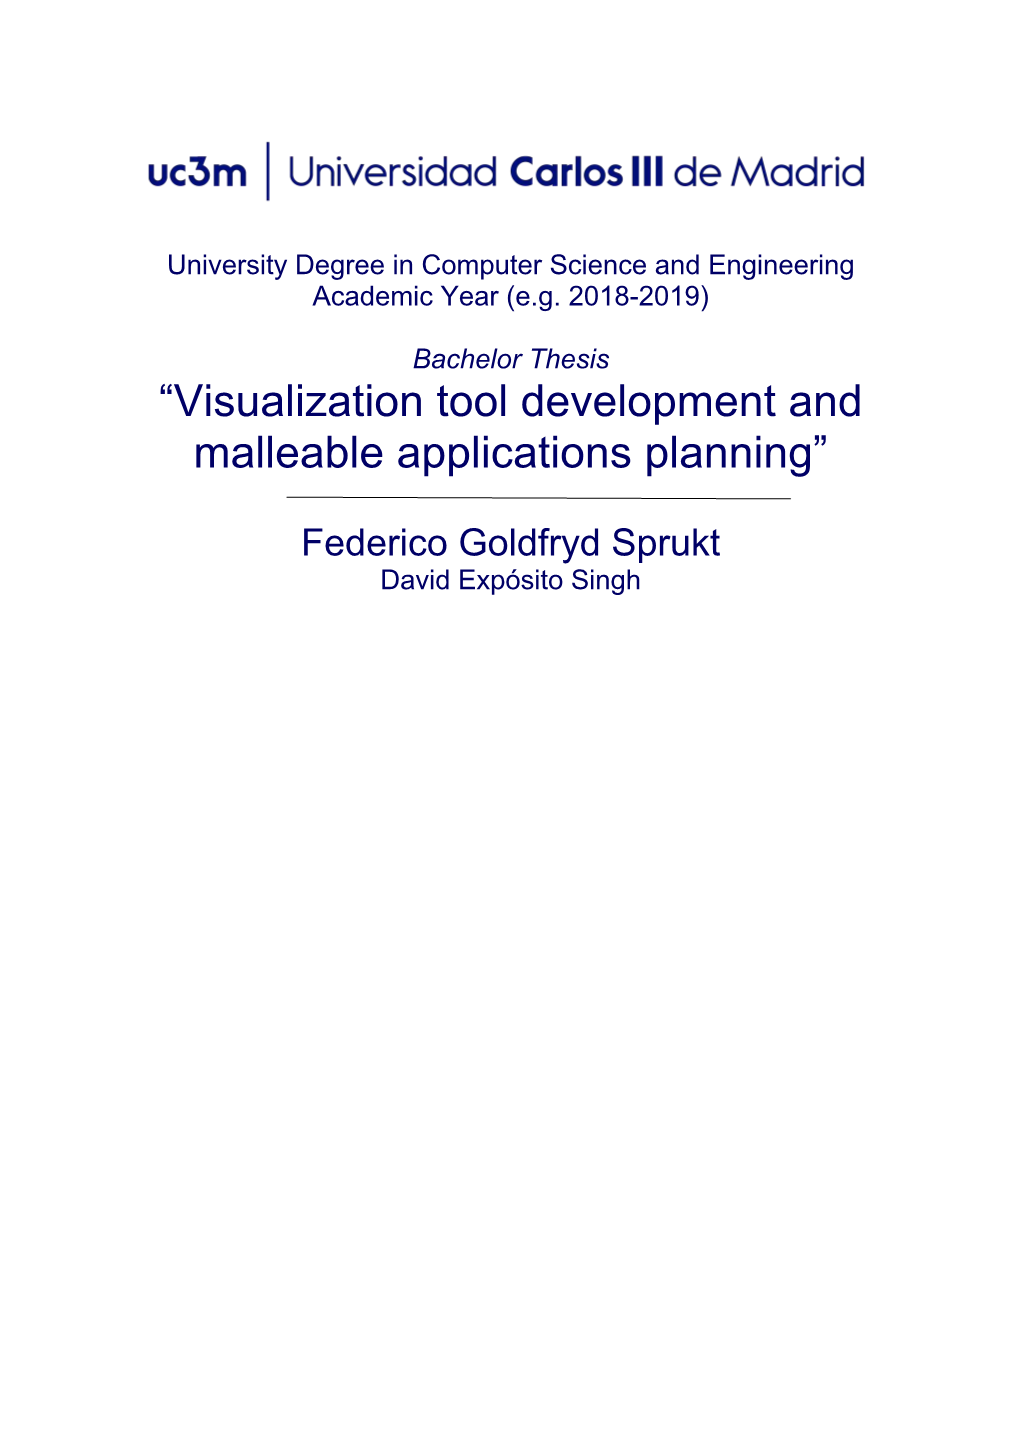 “Visualization Tool Development and Malleable Applications Planning”